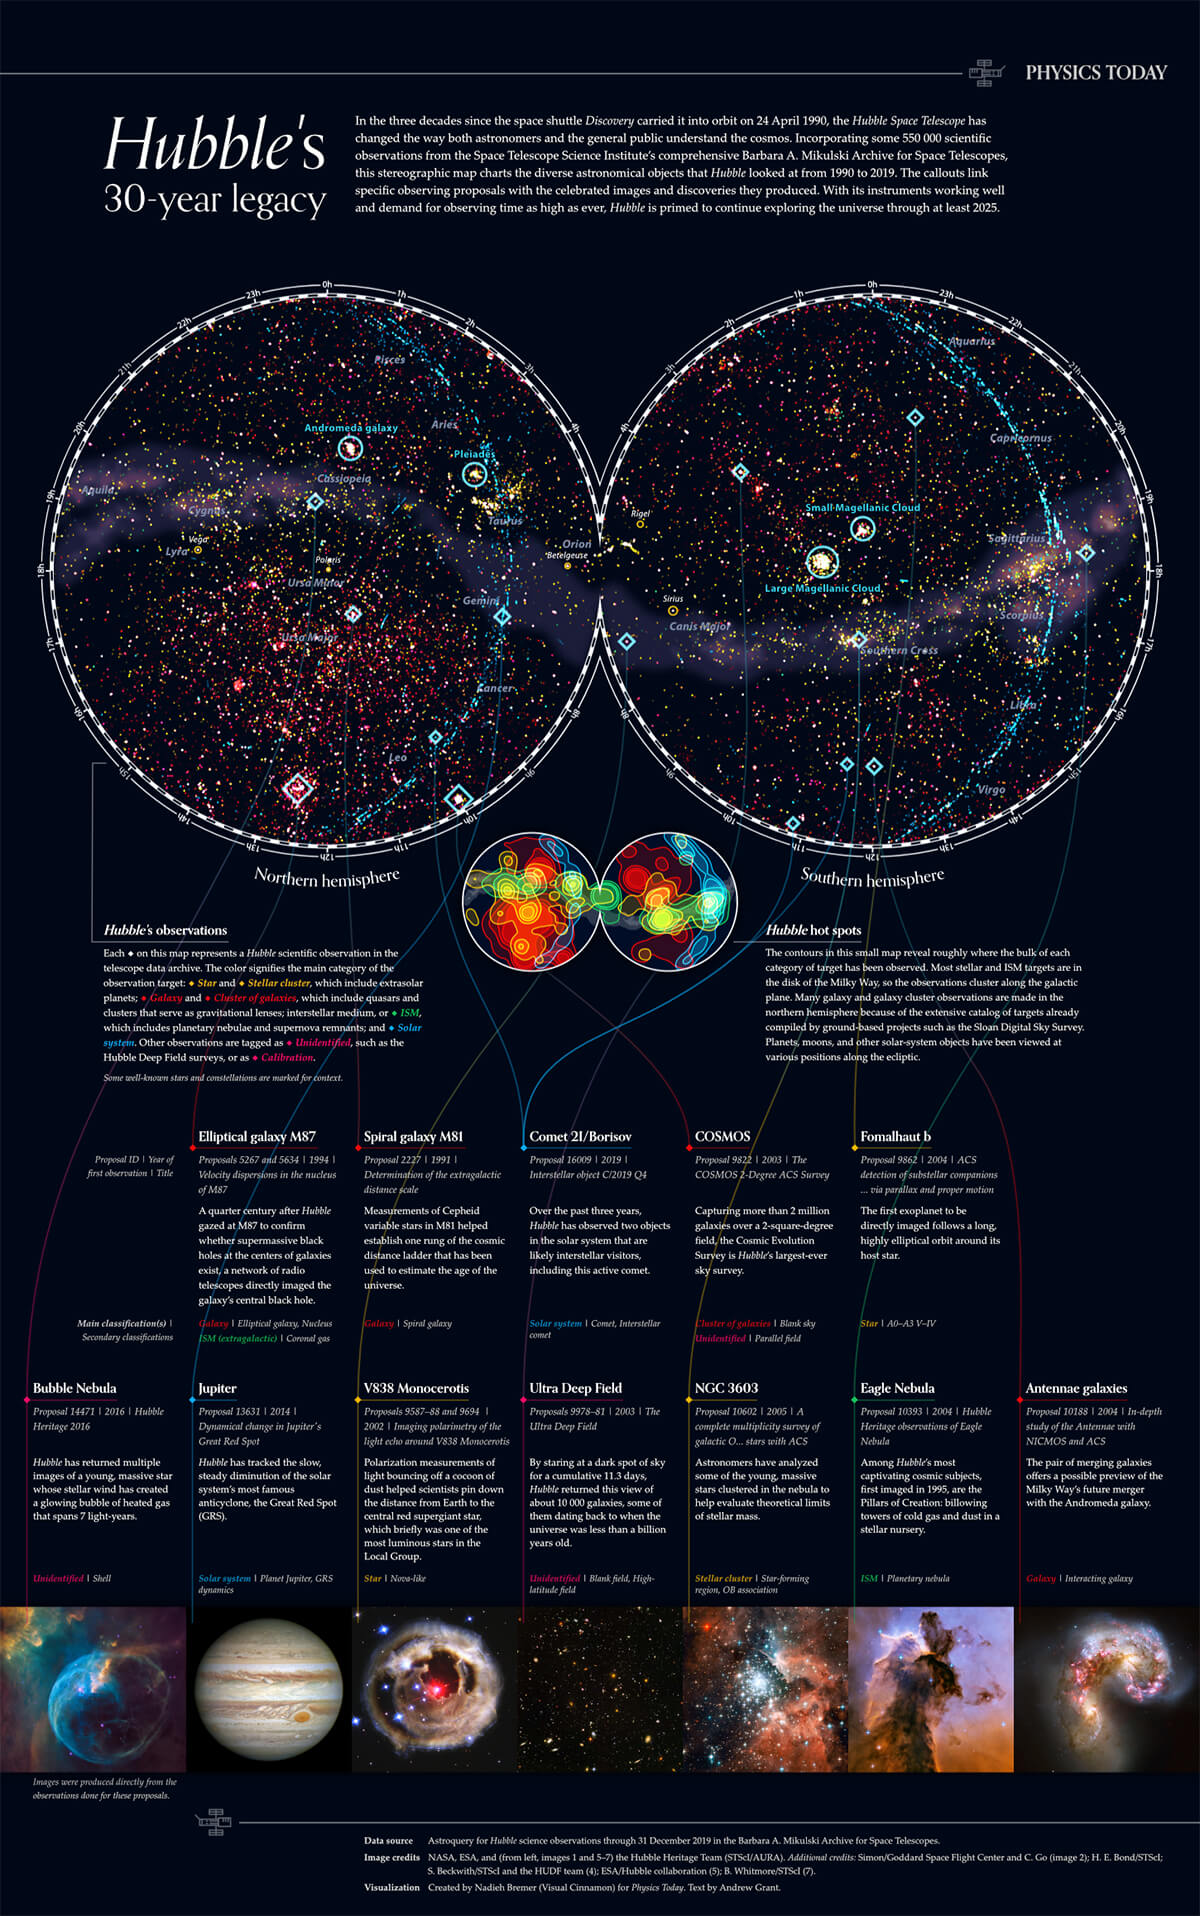 Infographic highlighting the Hubble Space Telescope's observations over 30 years